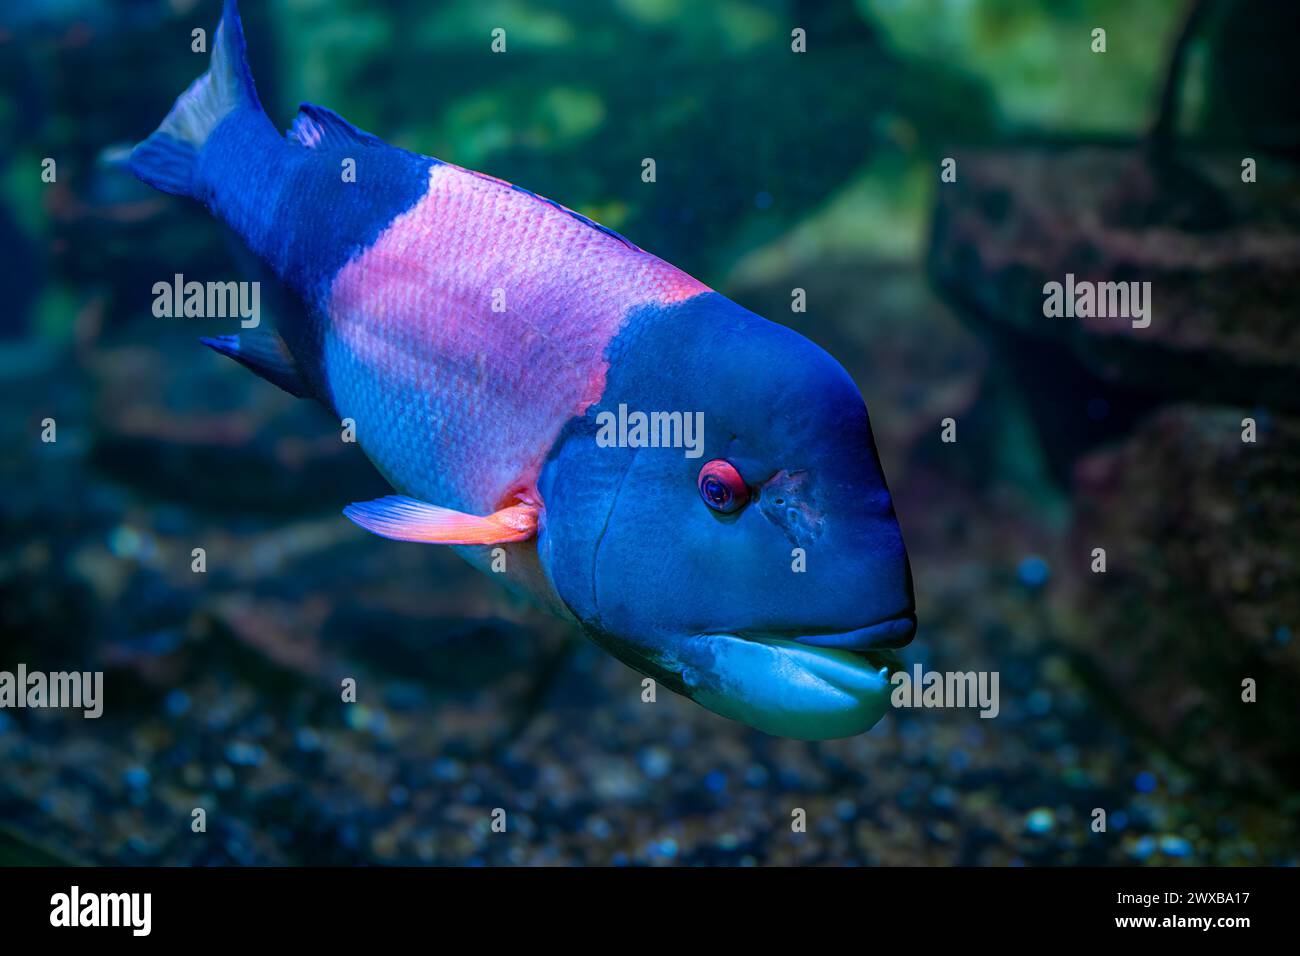 California hogfish also called California sheephead. (Semicossyphus pulcher). Native to the eastern Pacific Ocean. Stock Photo